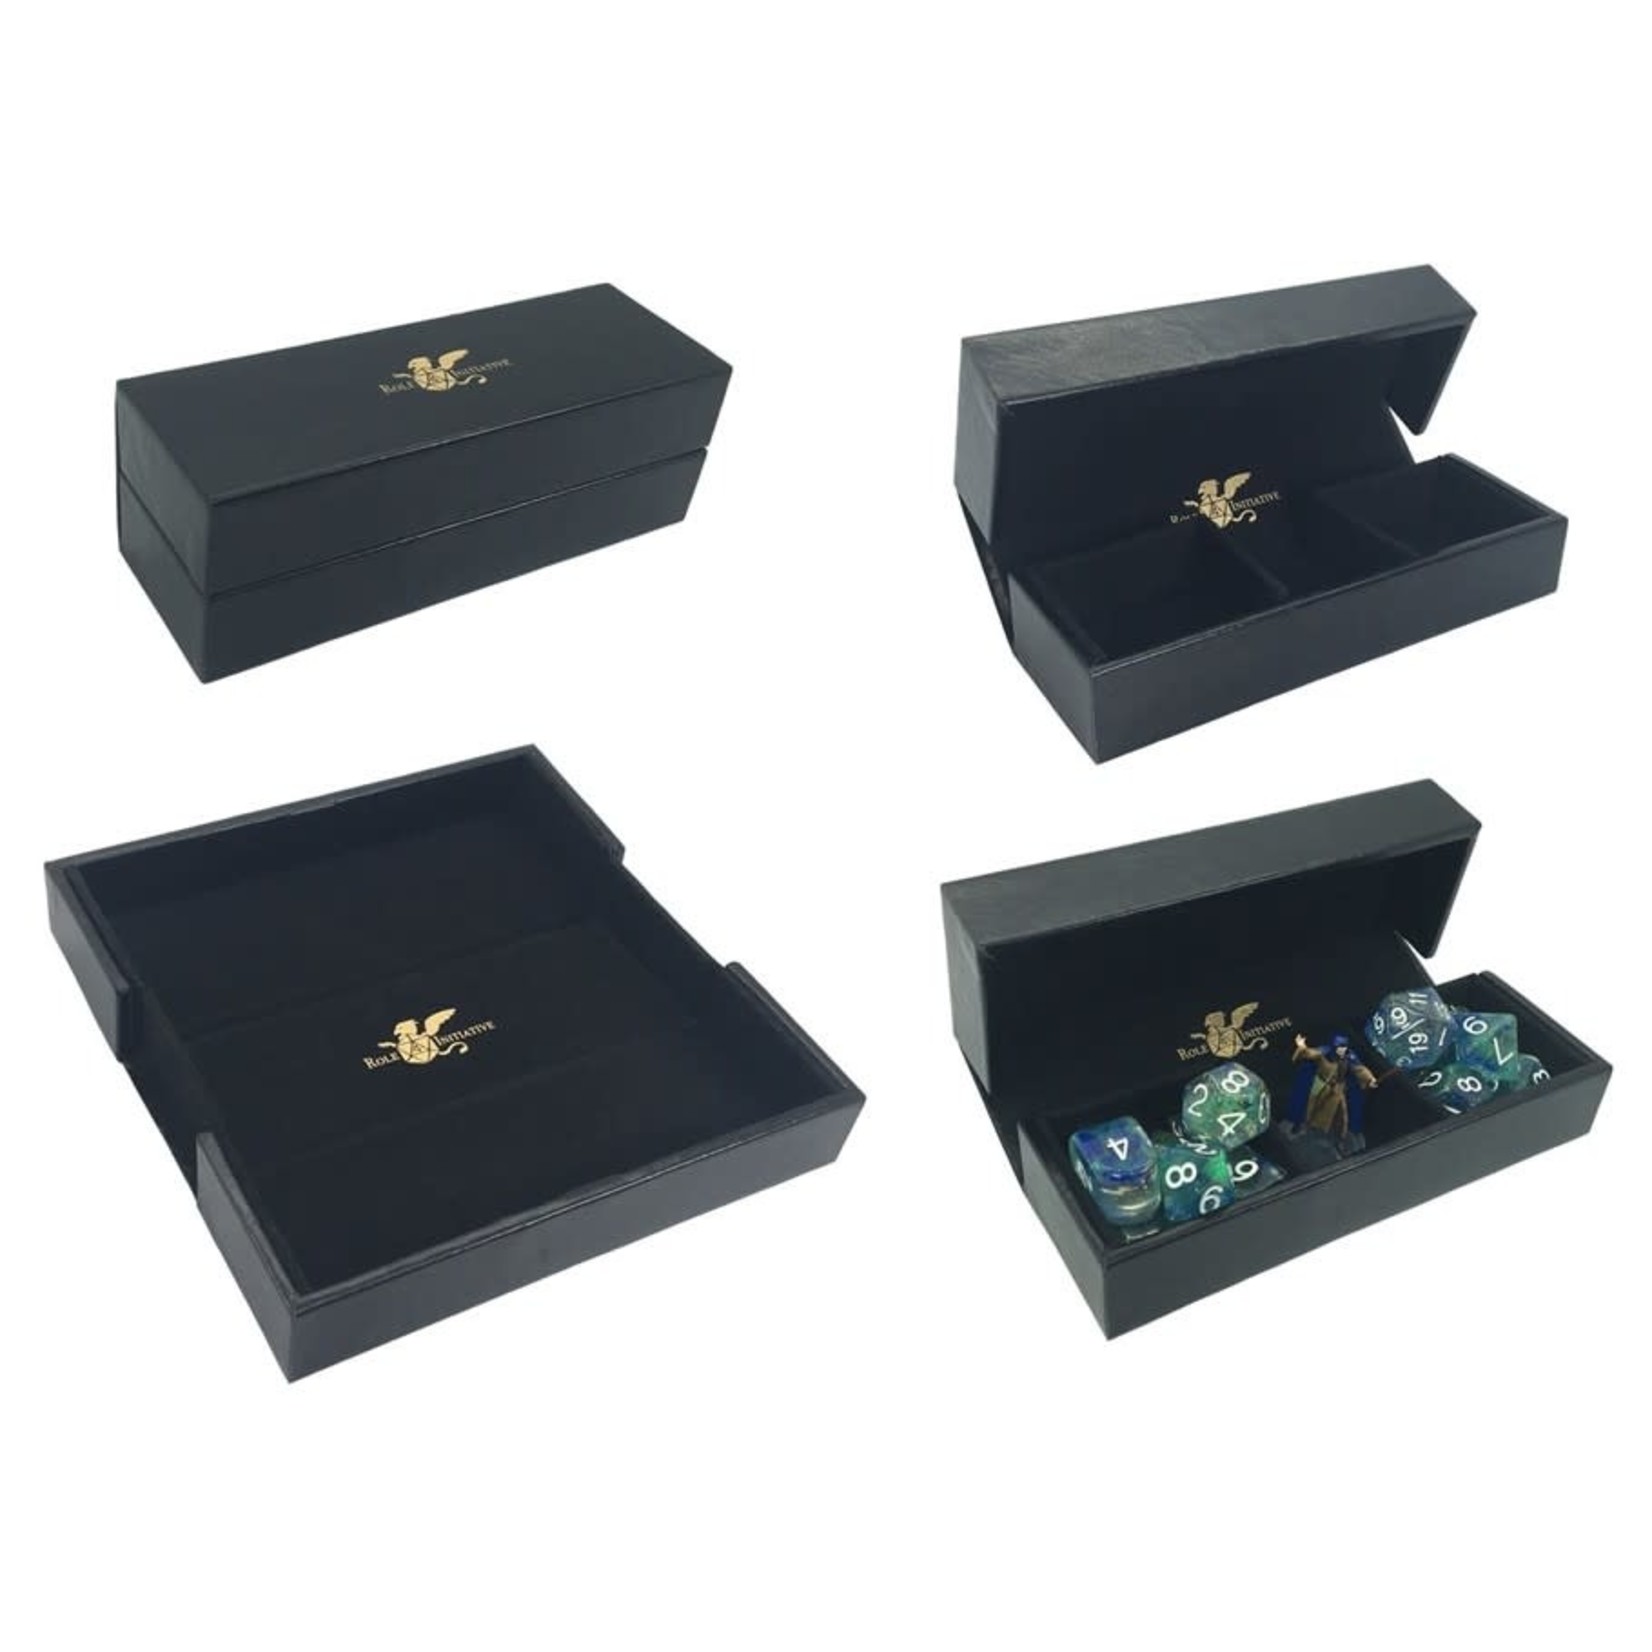 Dice Box & Rolling Tray: Luxury Faux Leather